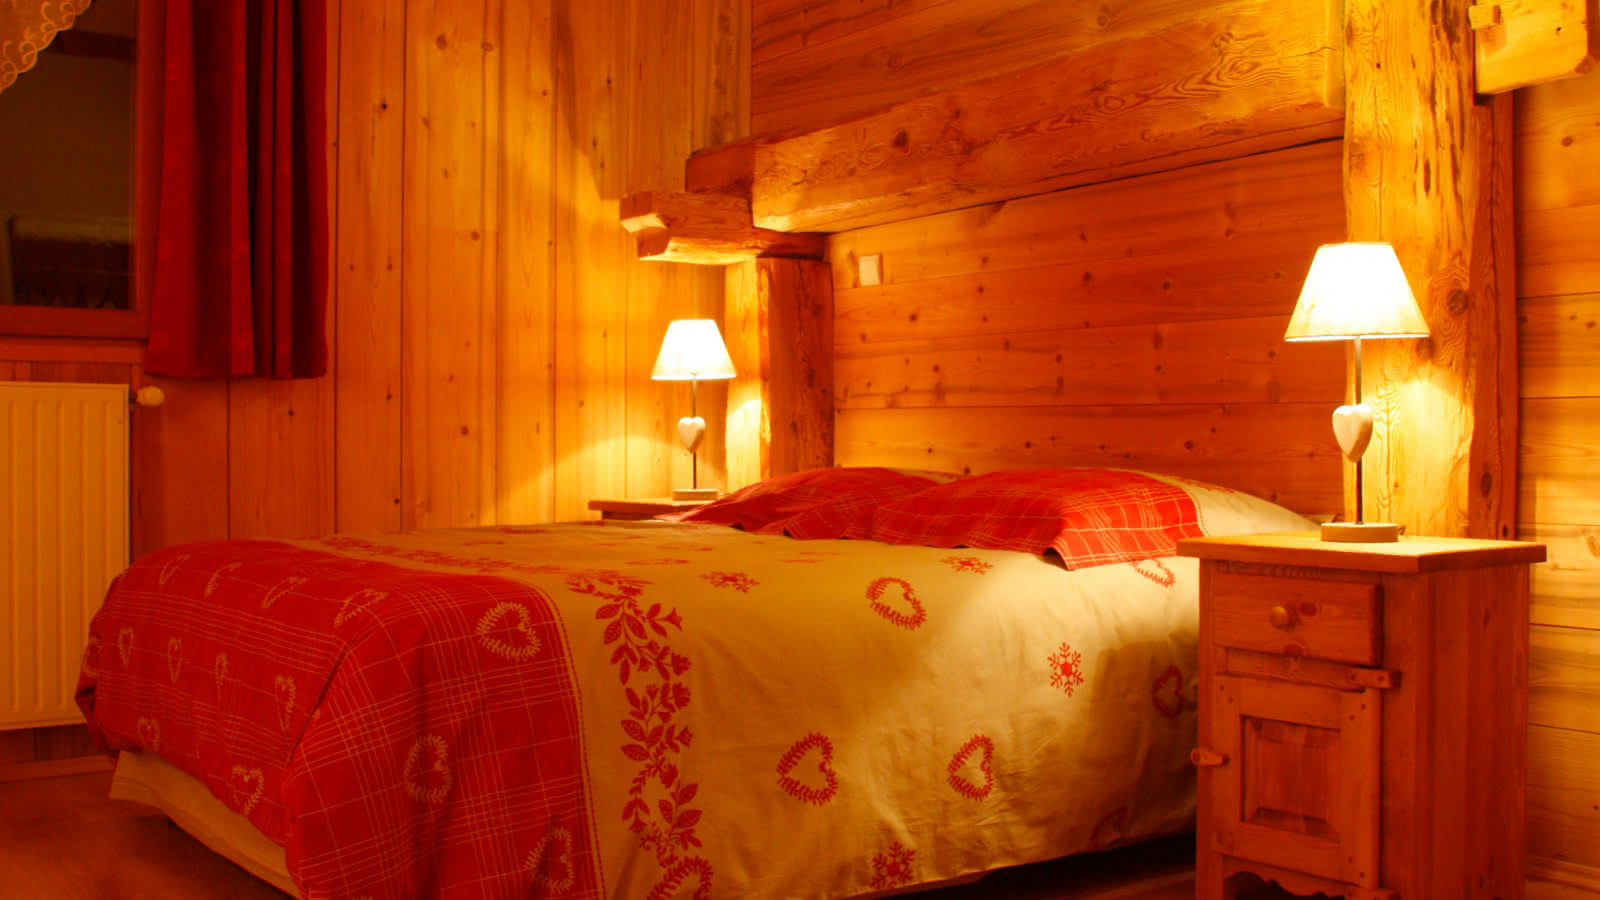 double bed and wood walls